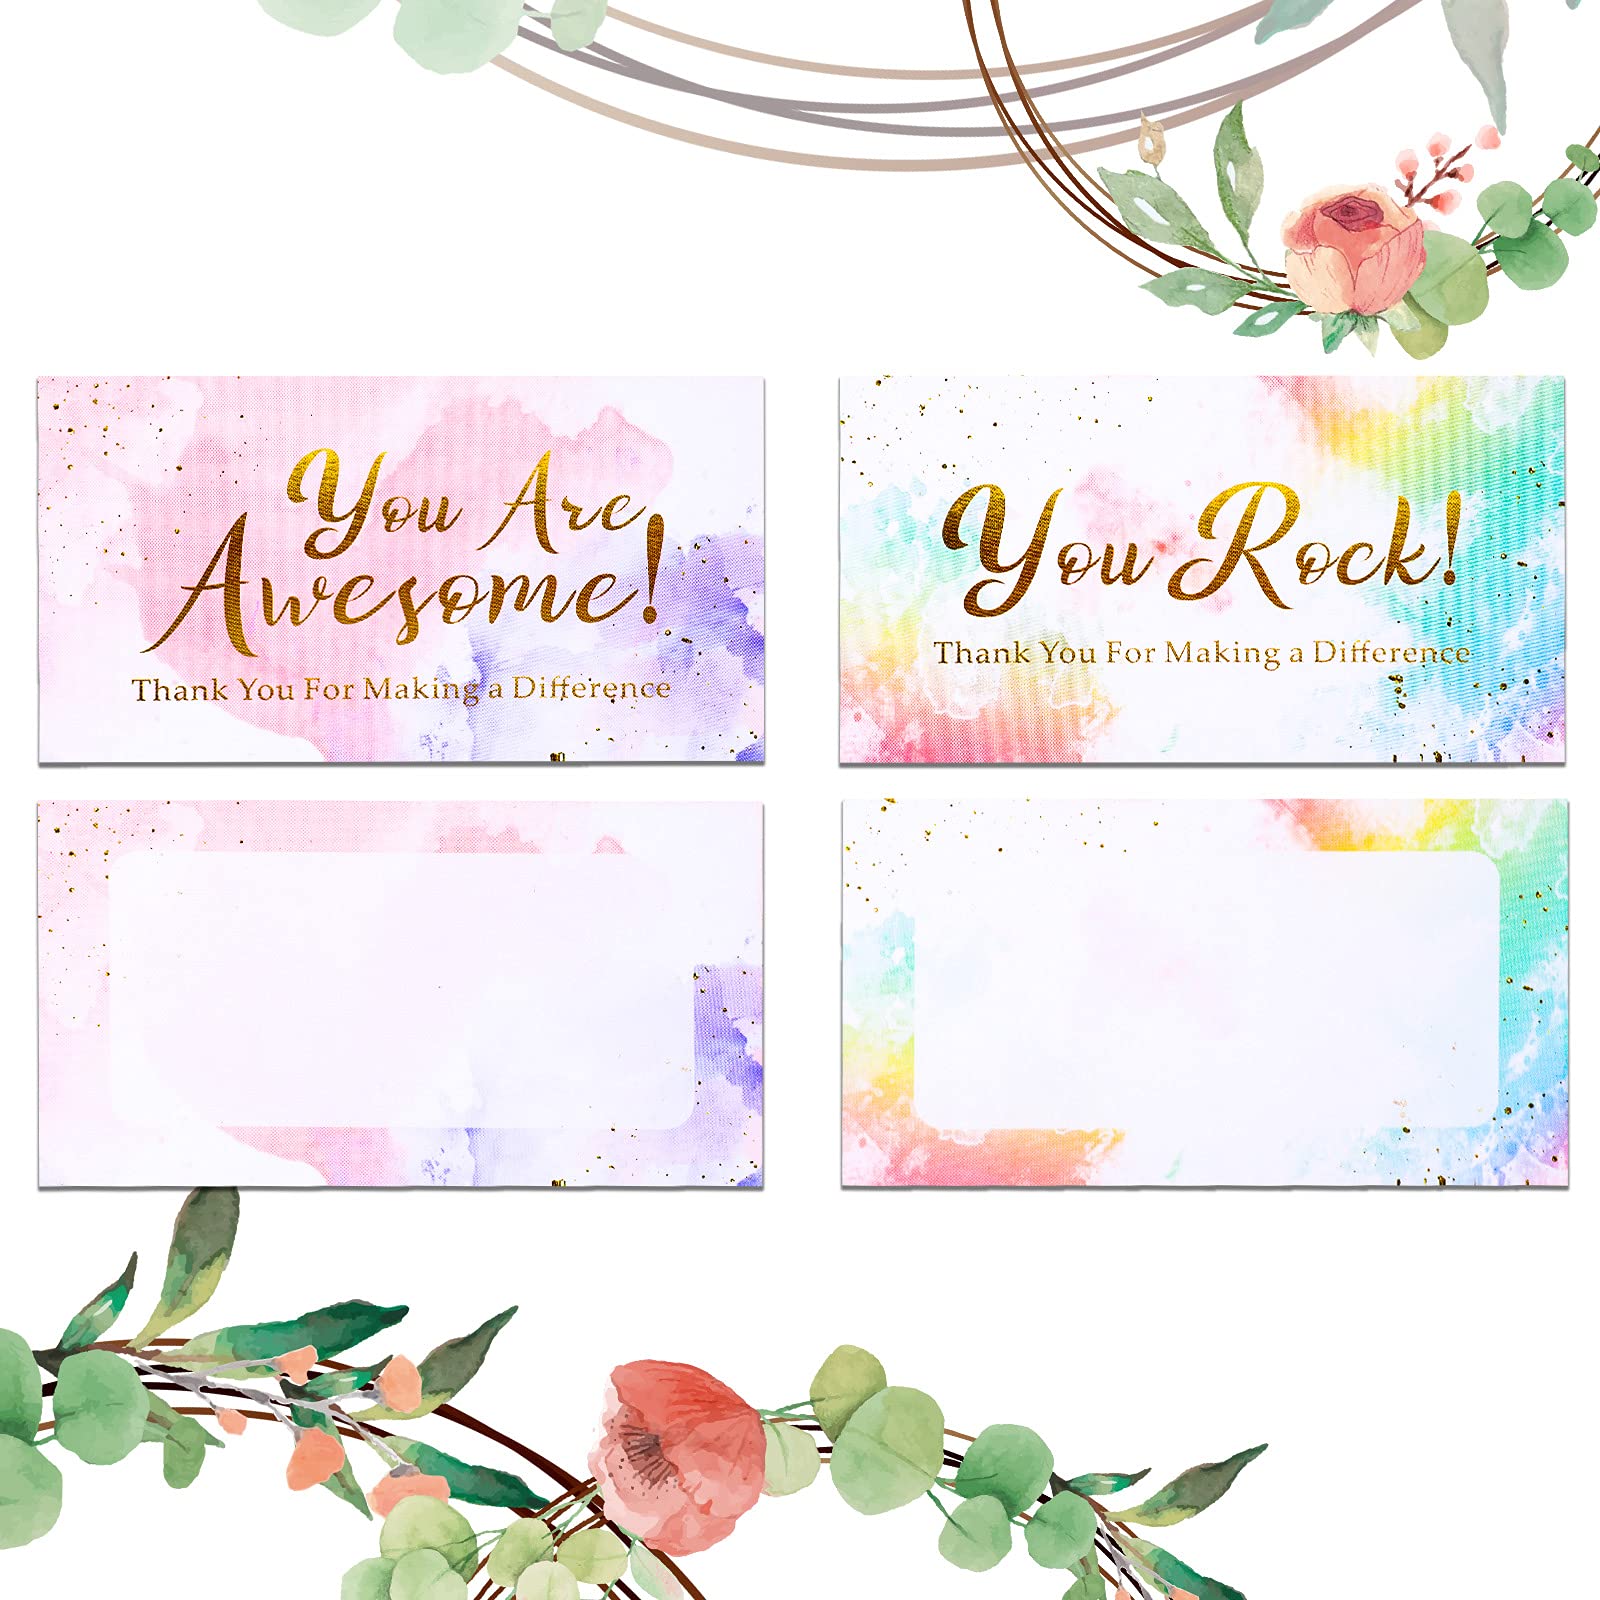 100 Pcs Appreciation Cards You Are Awesome Cards Positive Affirmations Cards Personalised Paper Nurse Appreciation Gifts Watercolor Thank You Postcards for Employee Doctor Teacher Baby Shower Wedding